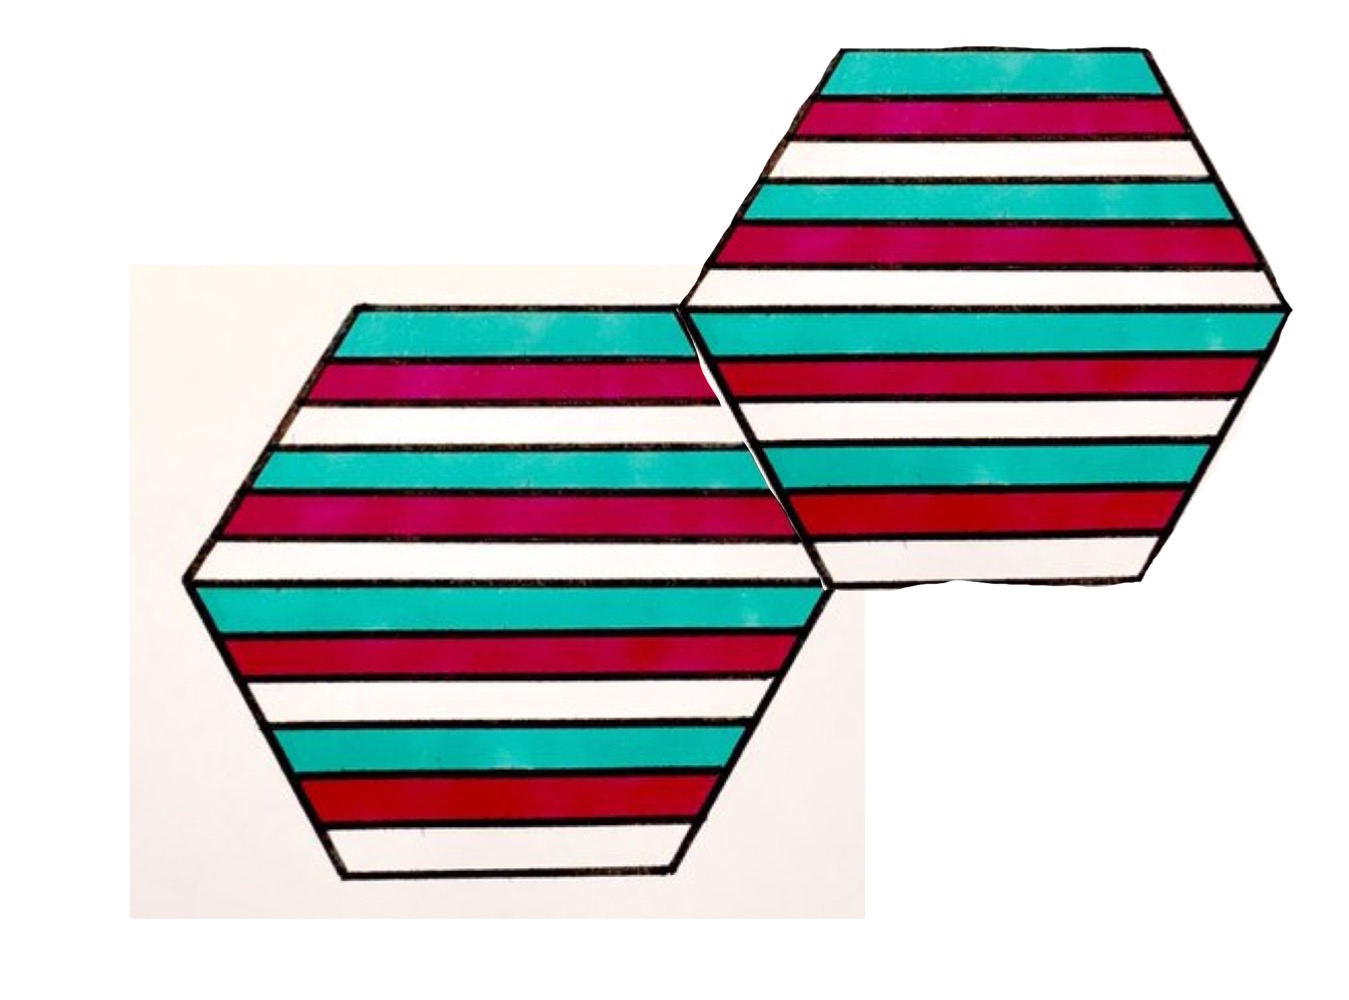 Striped hexagon labelled